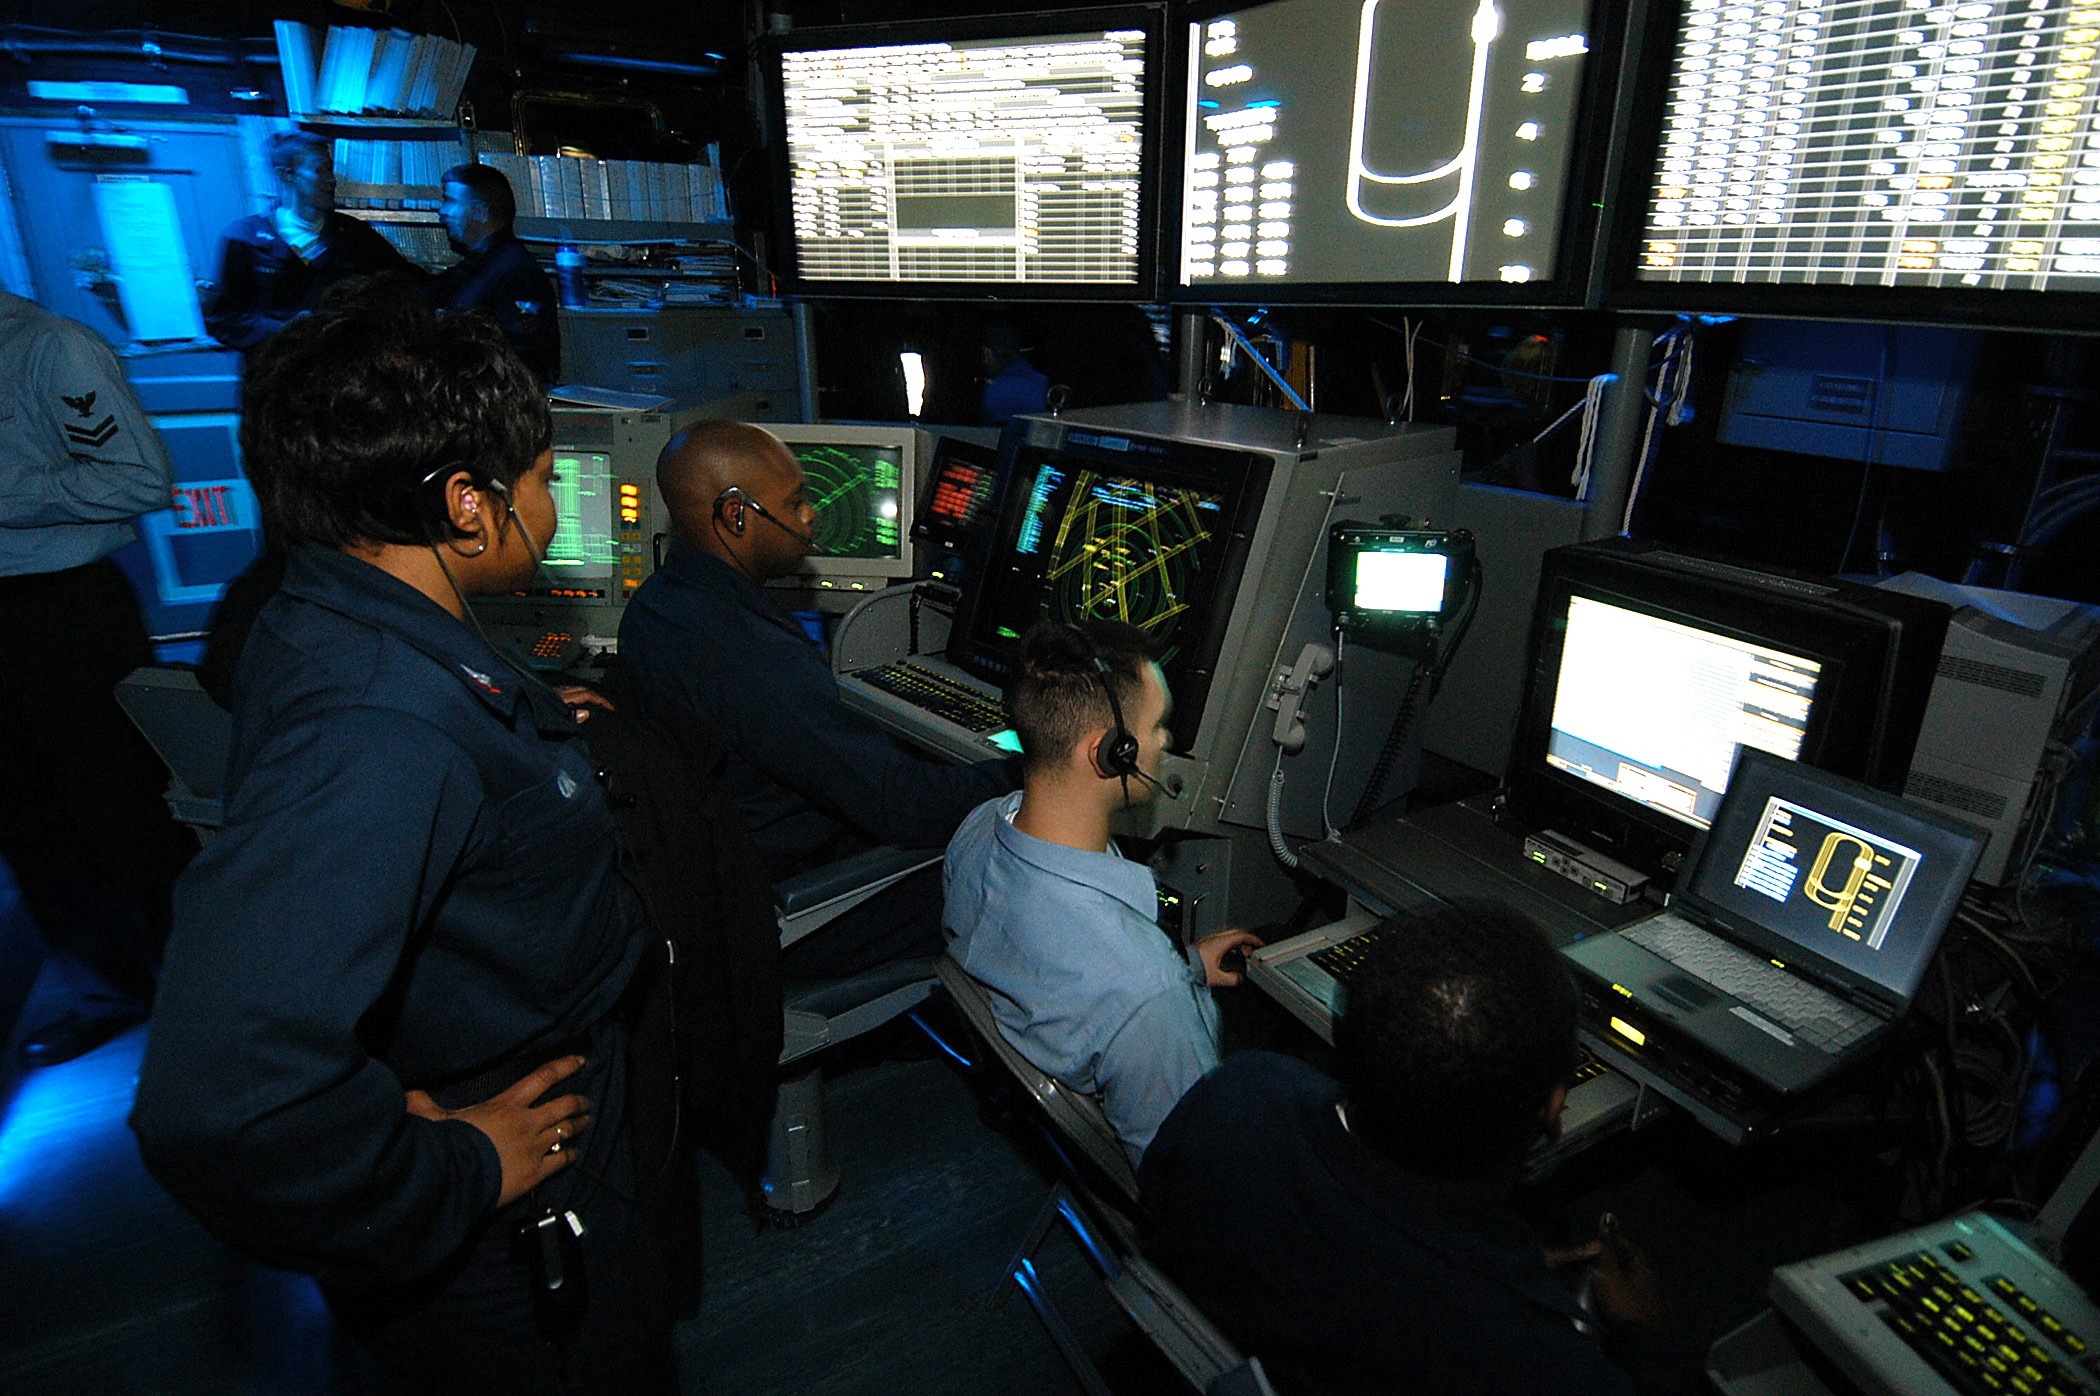 US Navy 031217-N-6278K-001 Air Traffic Controllers man the Carrier Air Traffic Control Center (CATCC) during flight operations aboard USS George Washington (CVN 73)